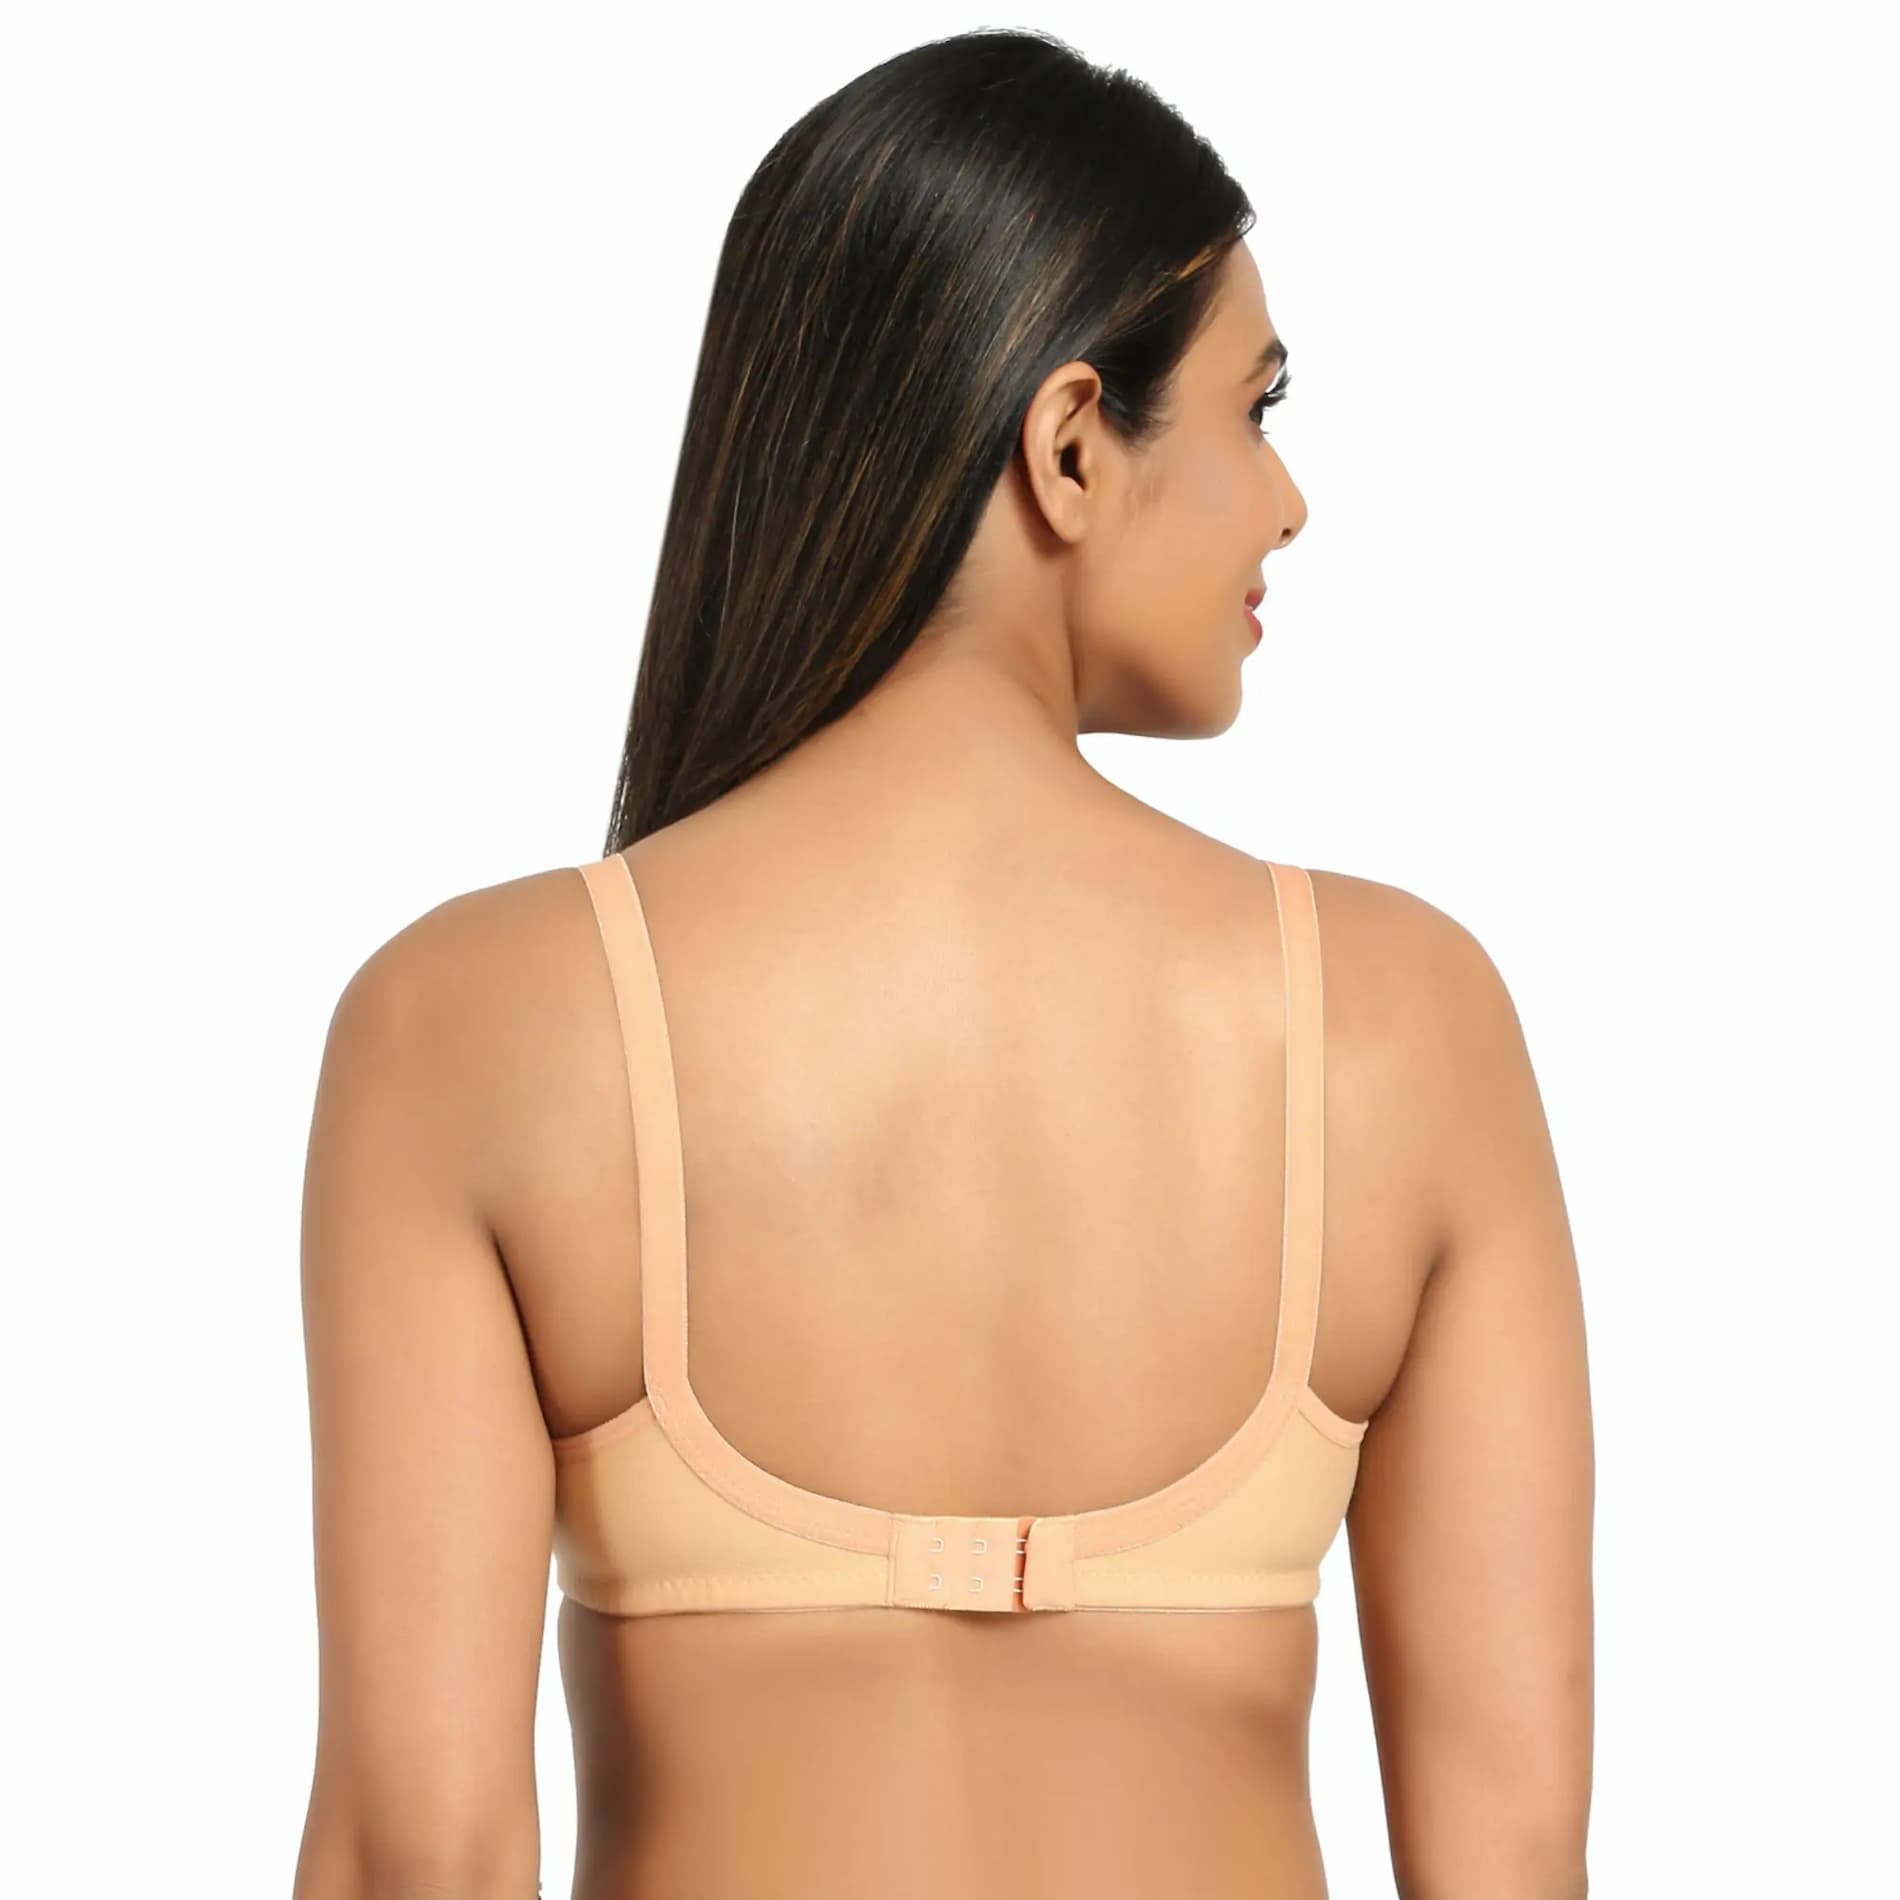 Mylo Maternity/Nursing Bras Non-Wired, Non-Padded - Pack of 3 with free Bra Extender (Sandalwood, Persian Blue & Dark pink) 30 B